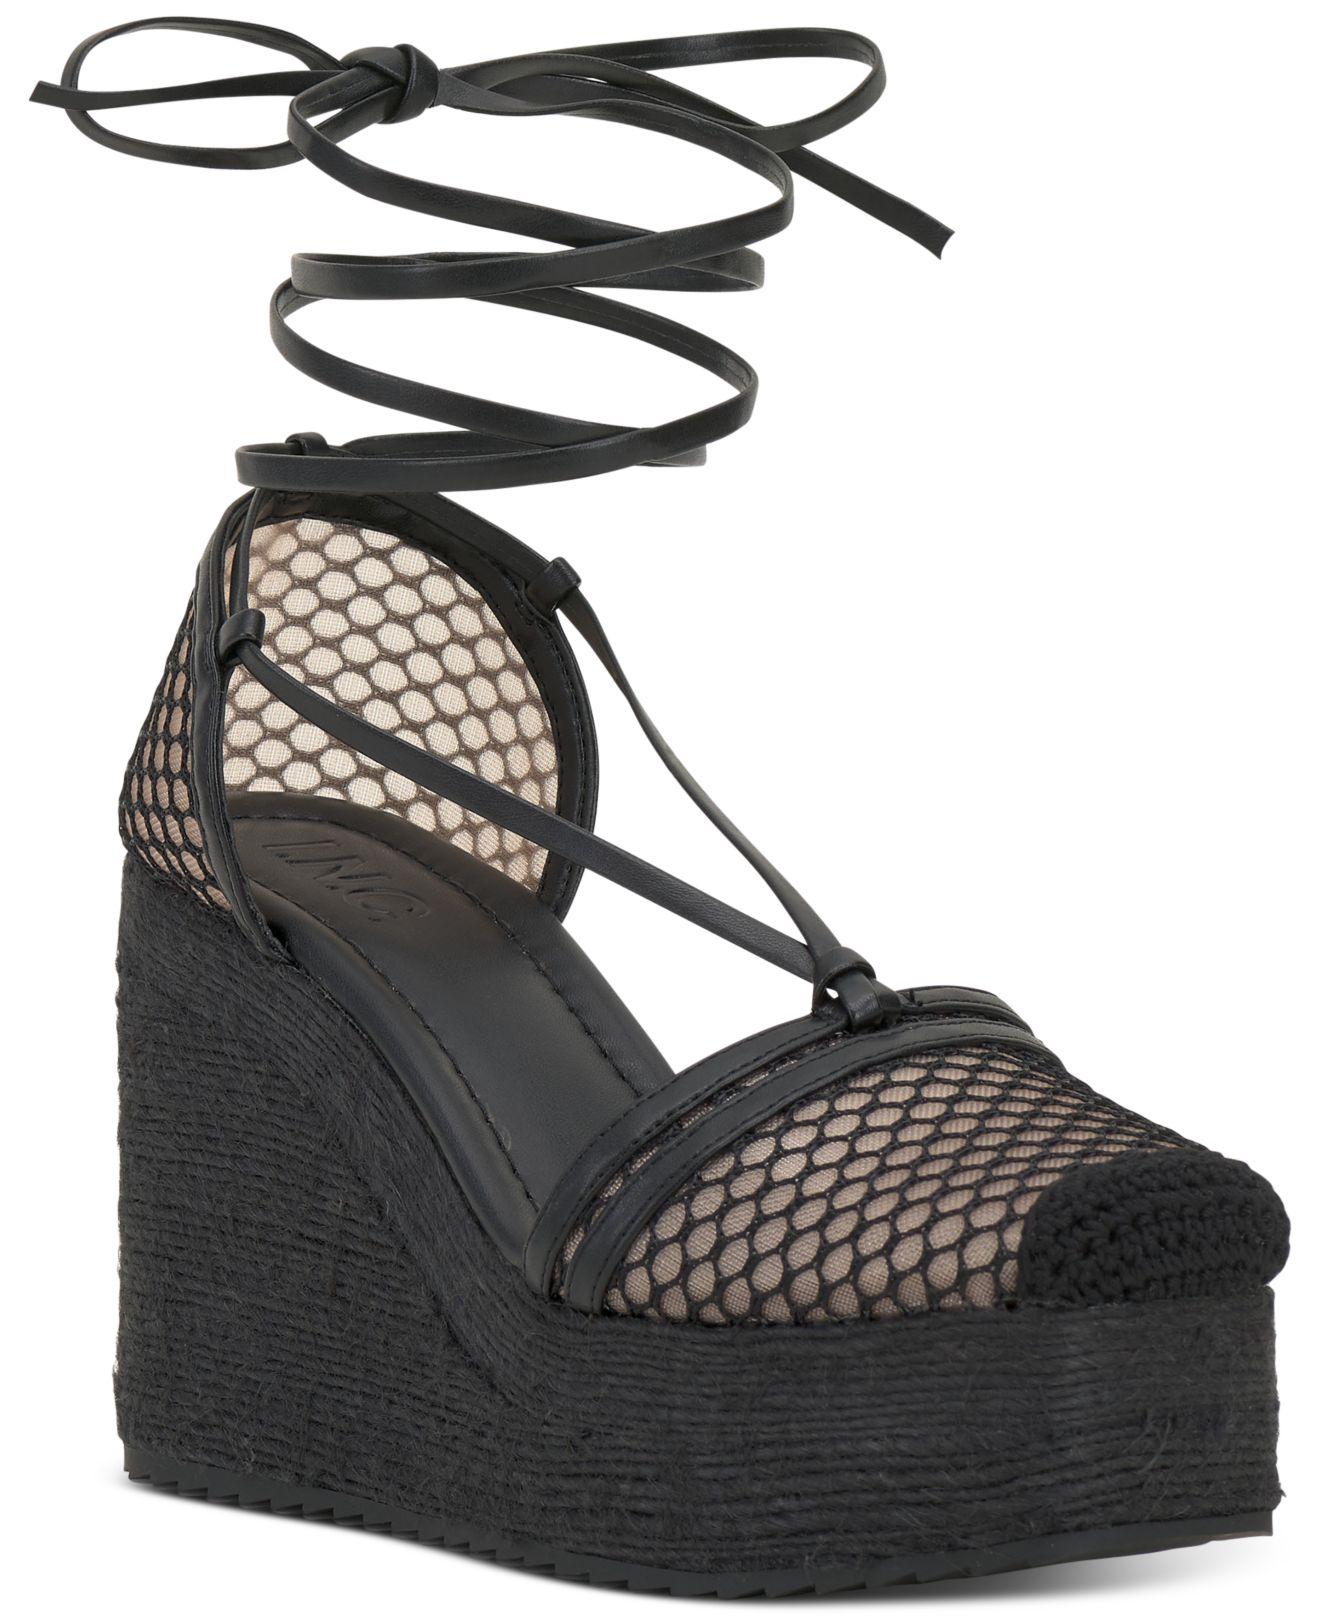 Black Lace Up Wedge Sandals (Sexy)